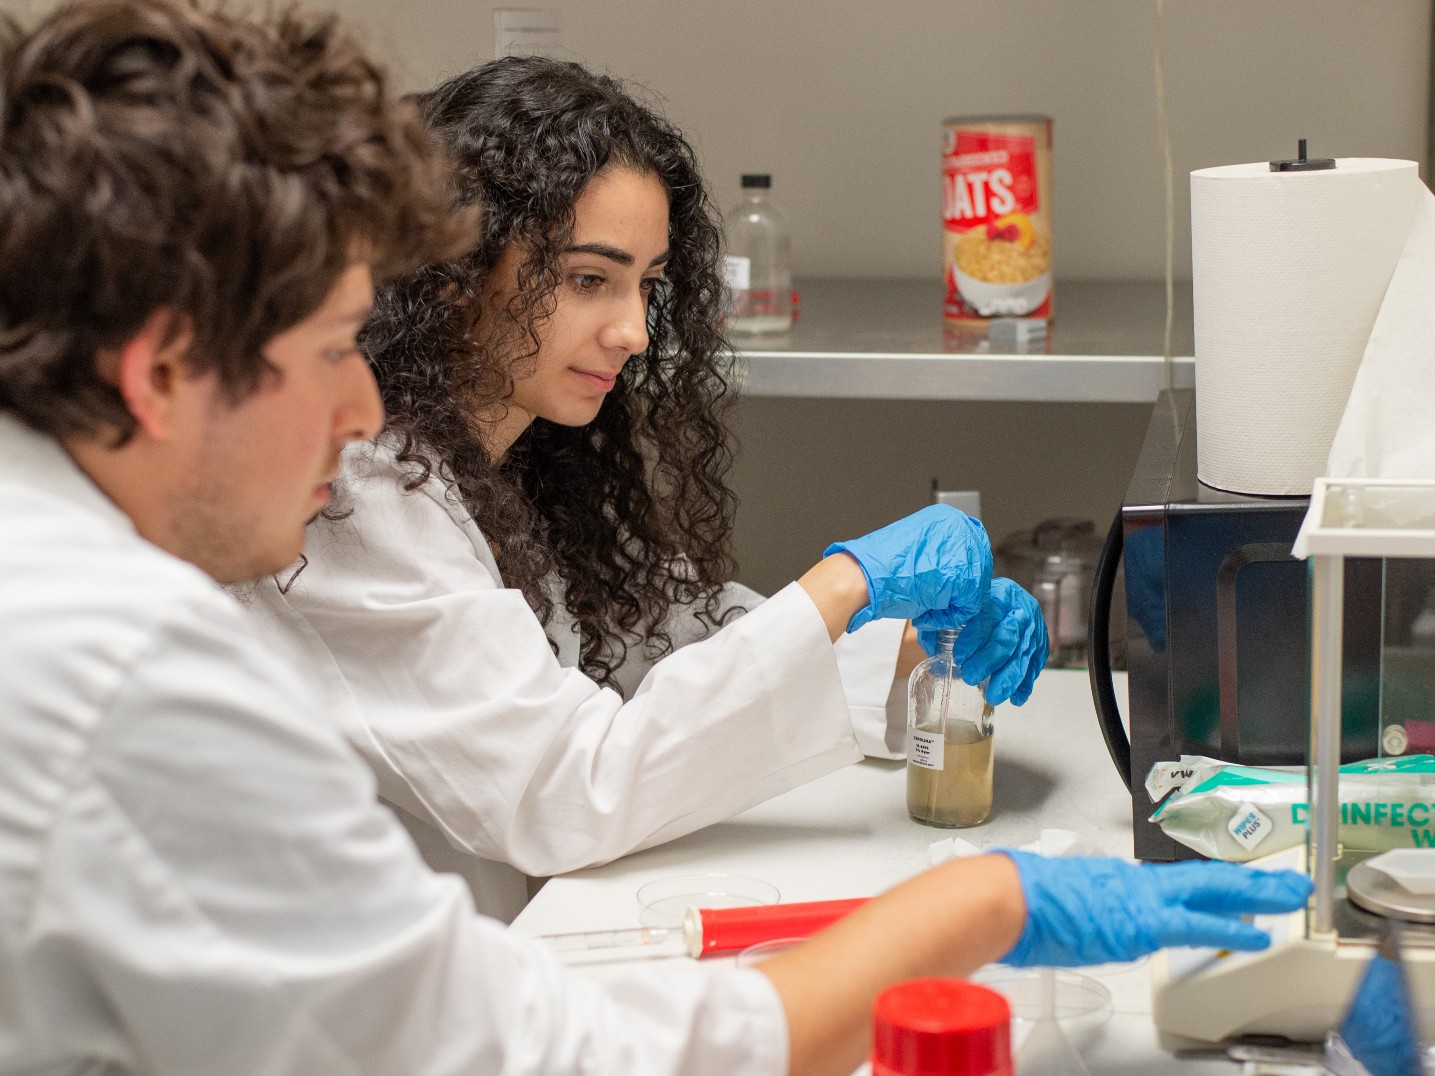 Liam Safran 23 and Jenny Makhoul worked with slime mold and memory during summer research.